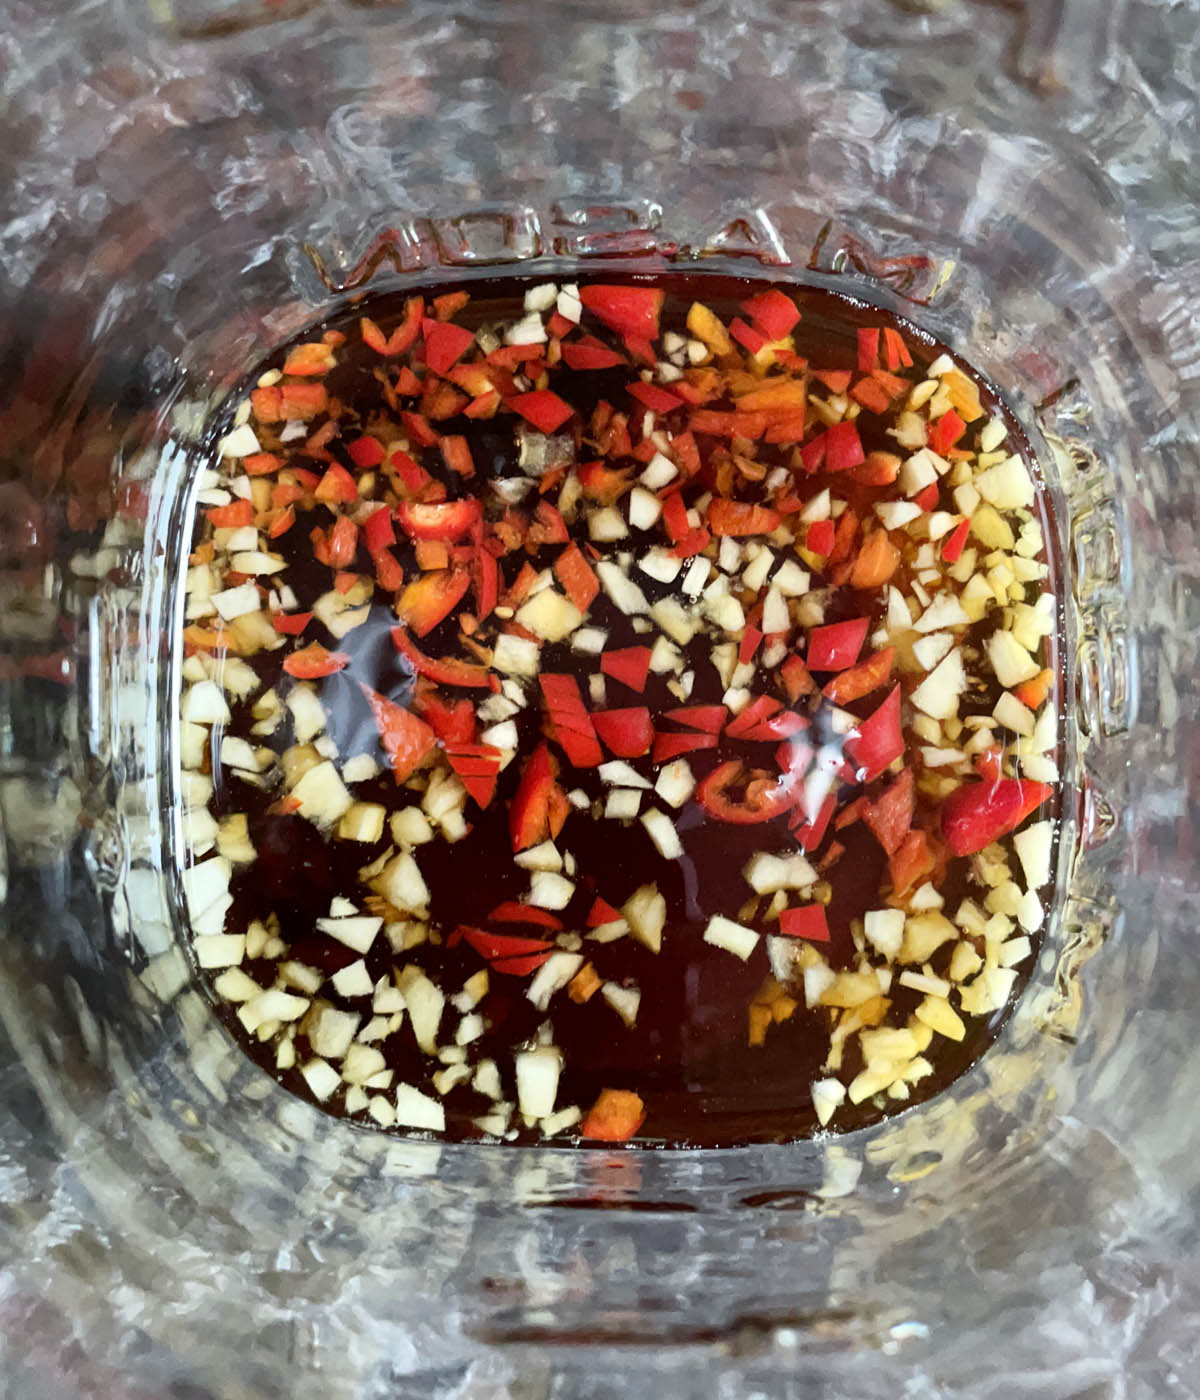 A glass jar containing brown liquid, chopped garlic, and chopped red chili peppers.